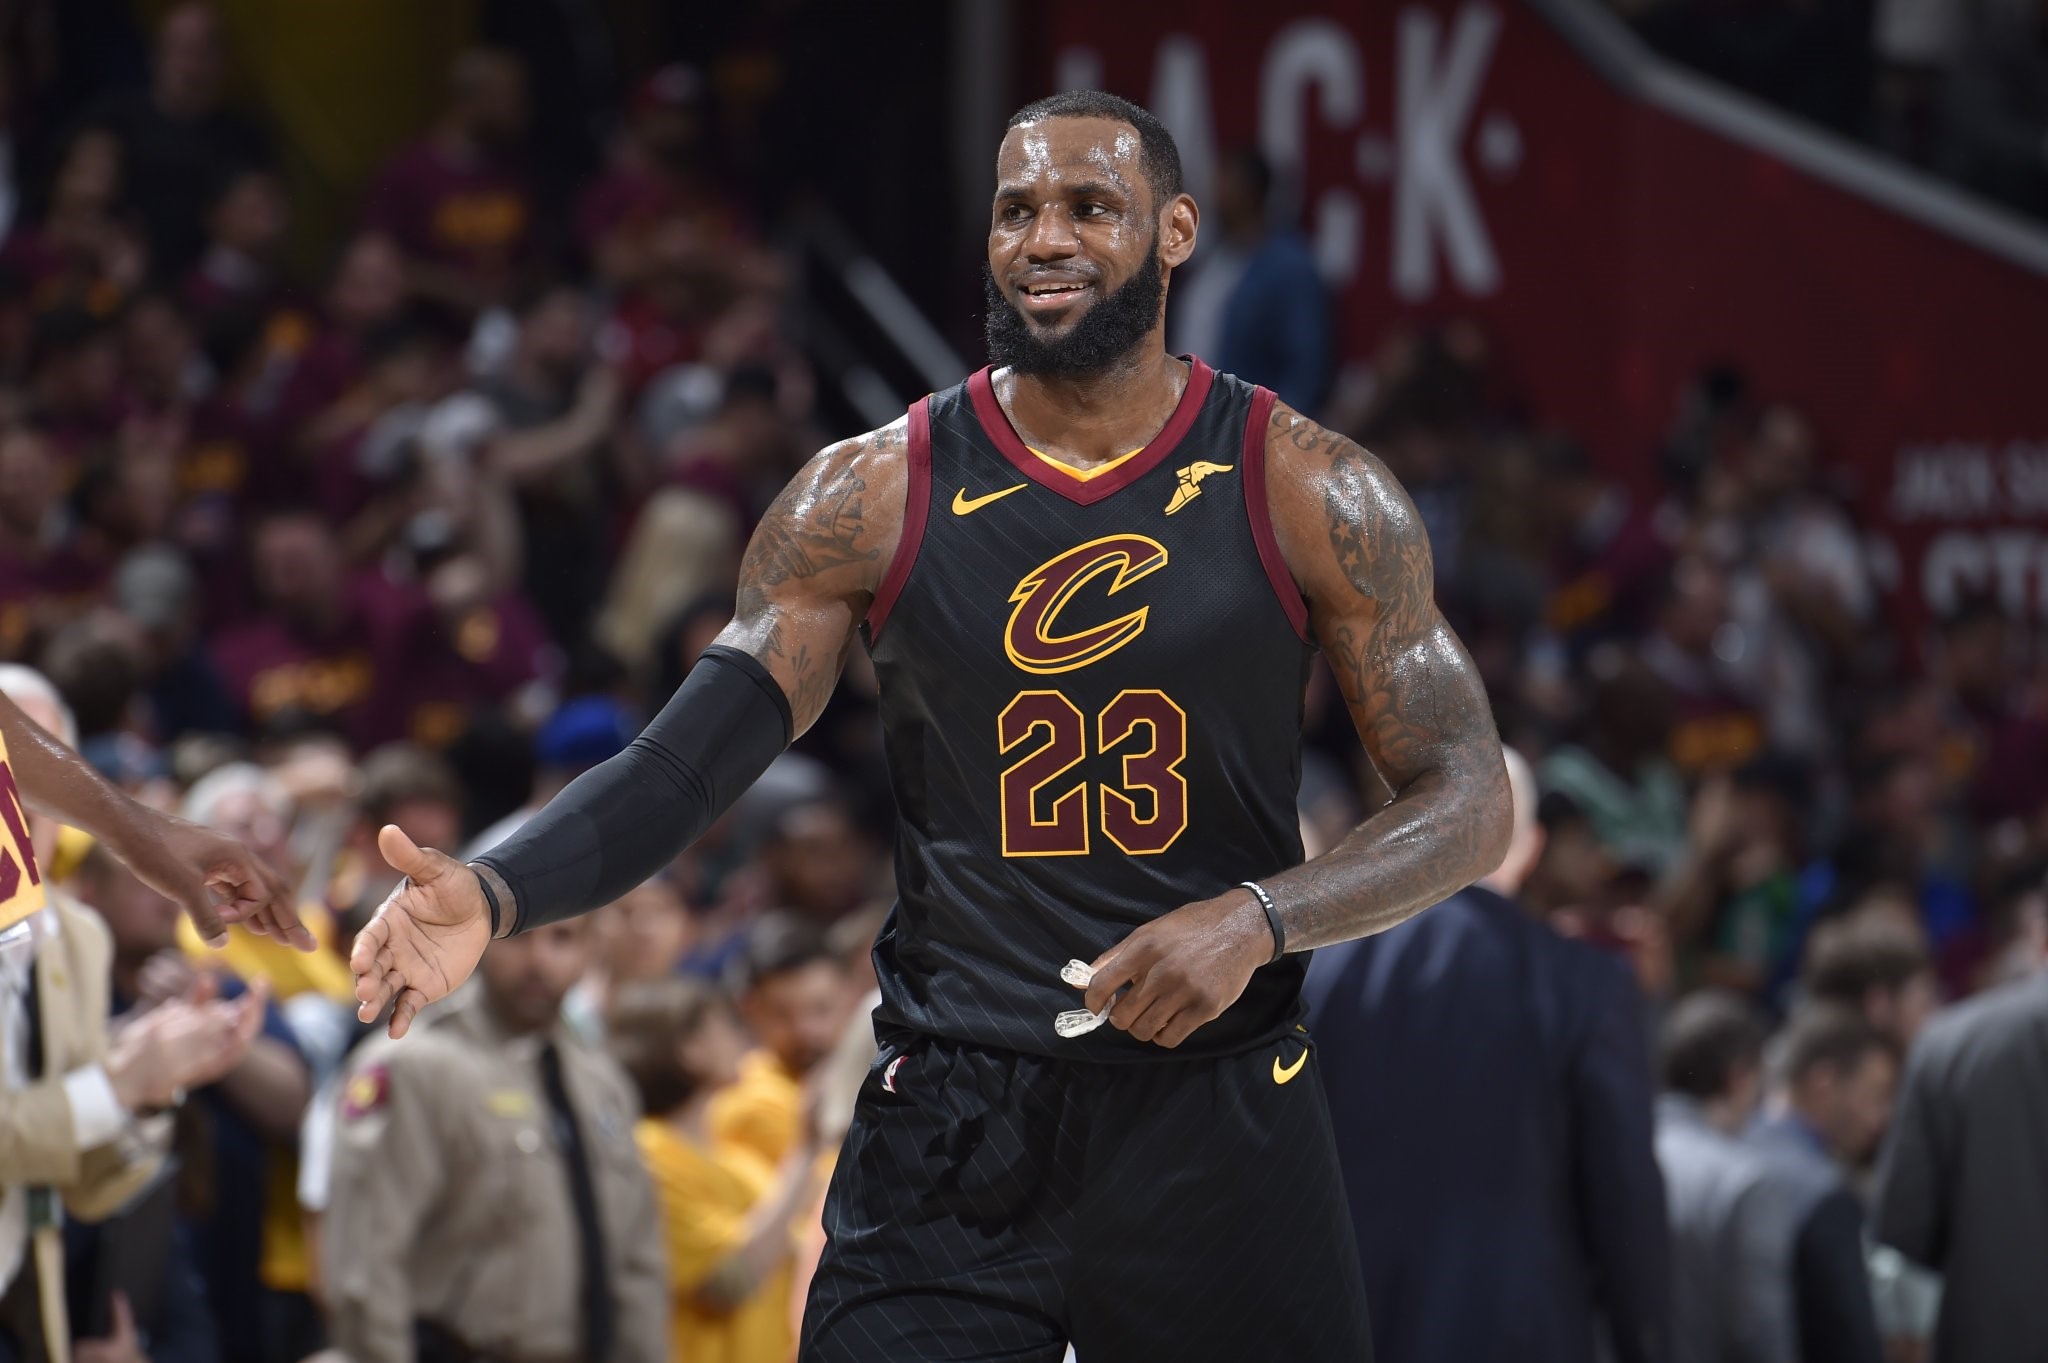 Day 33 of the NBA Playoffs: LeBron Powers Cavs To Equalizer